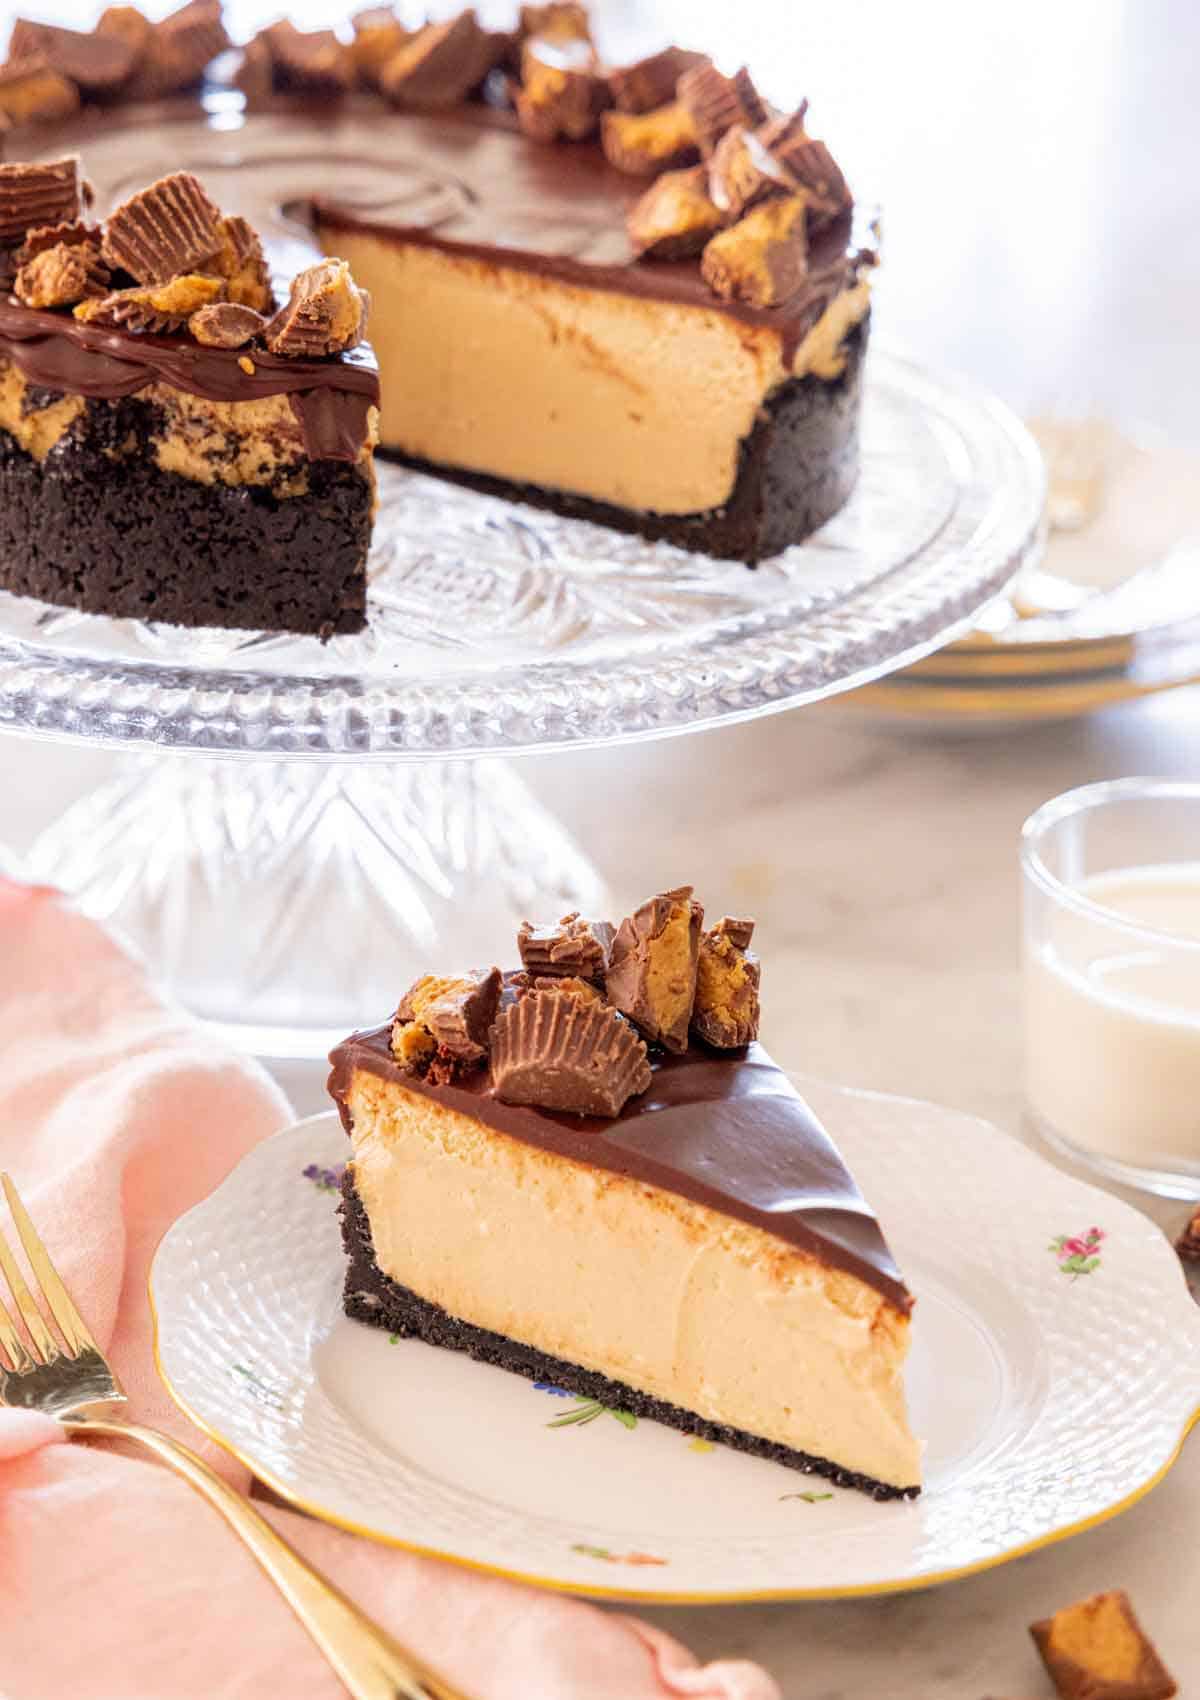 A slice of peanut butter cheesecake on a plate in front of a cake stand with the rest of the cake.